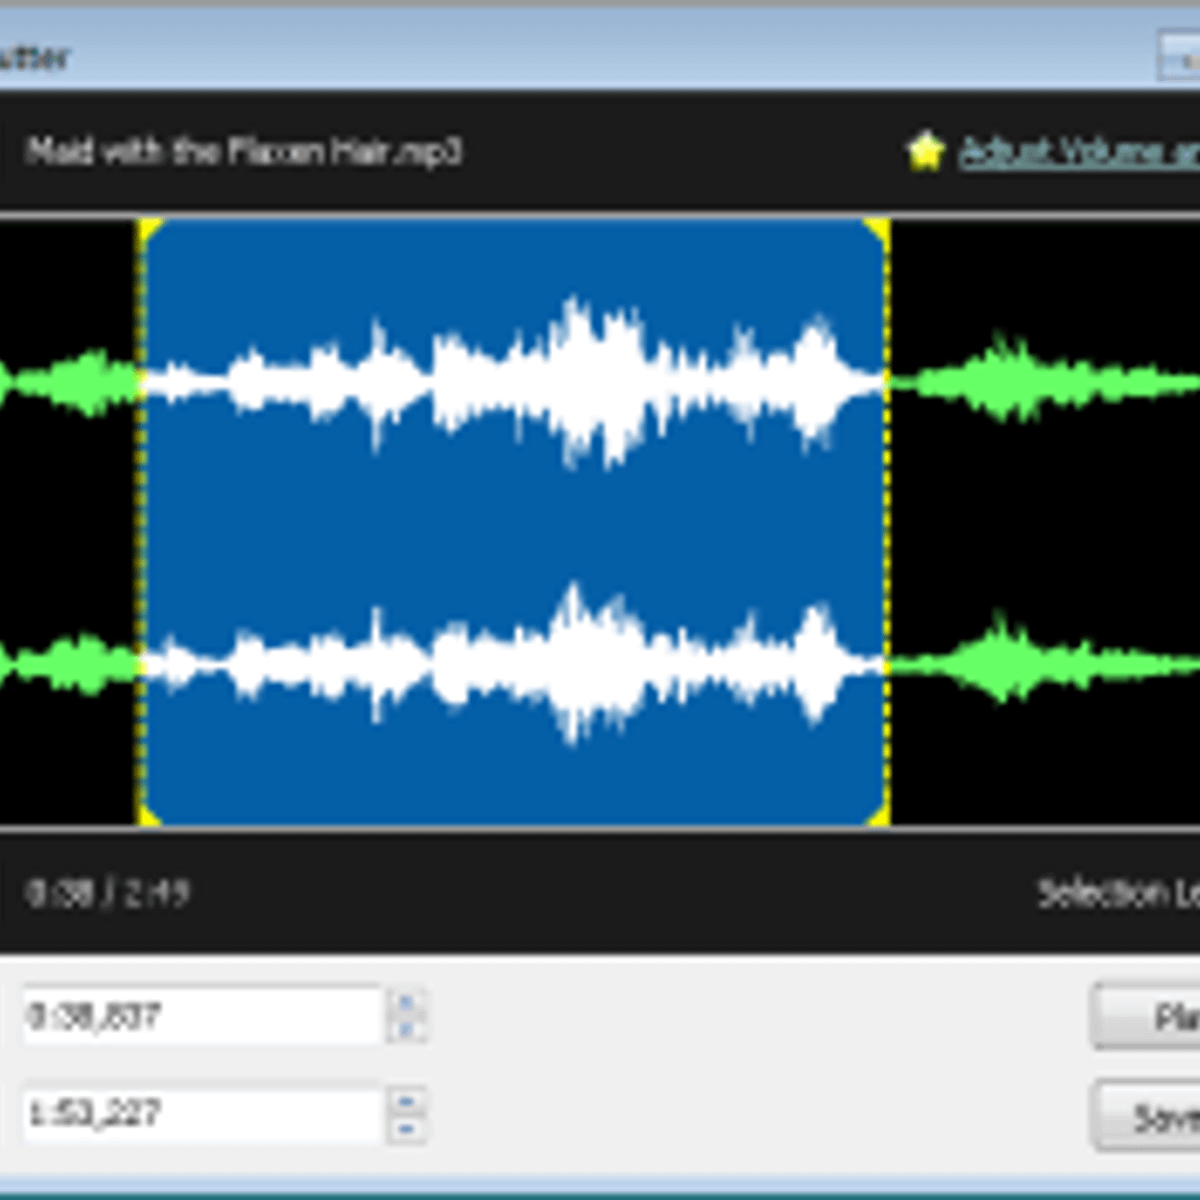 audio cutter free download for mac